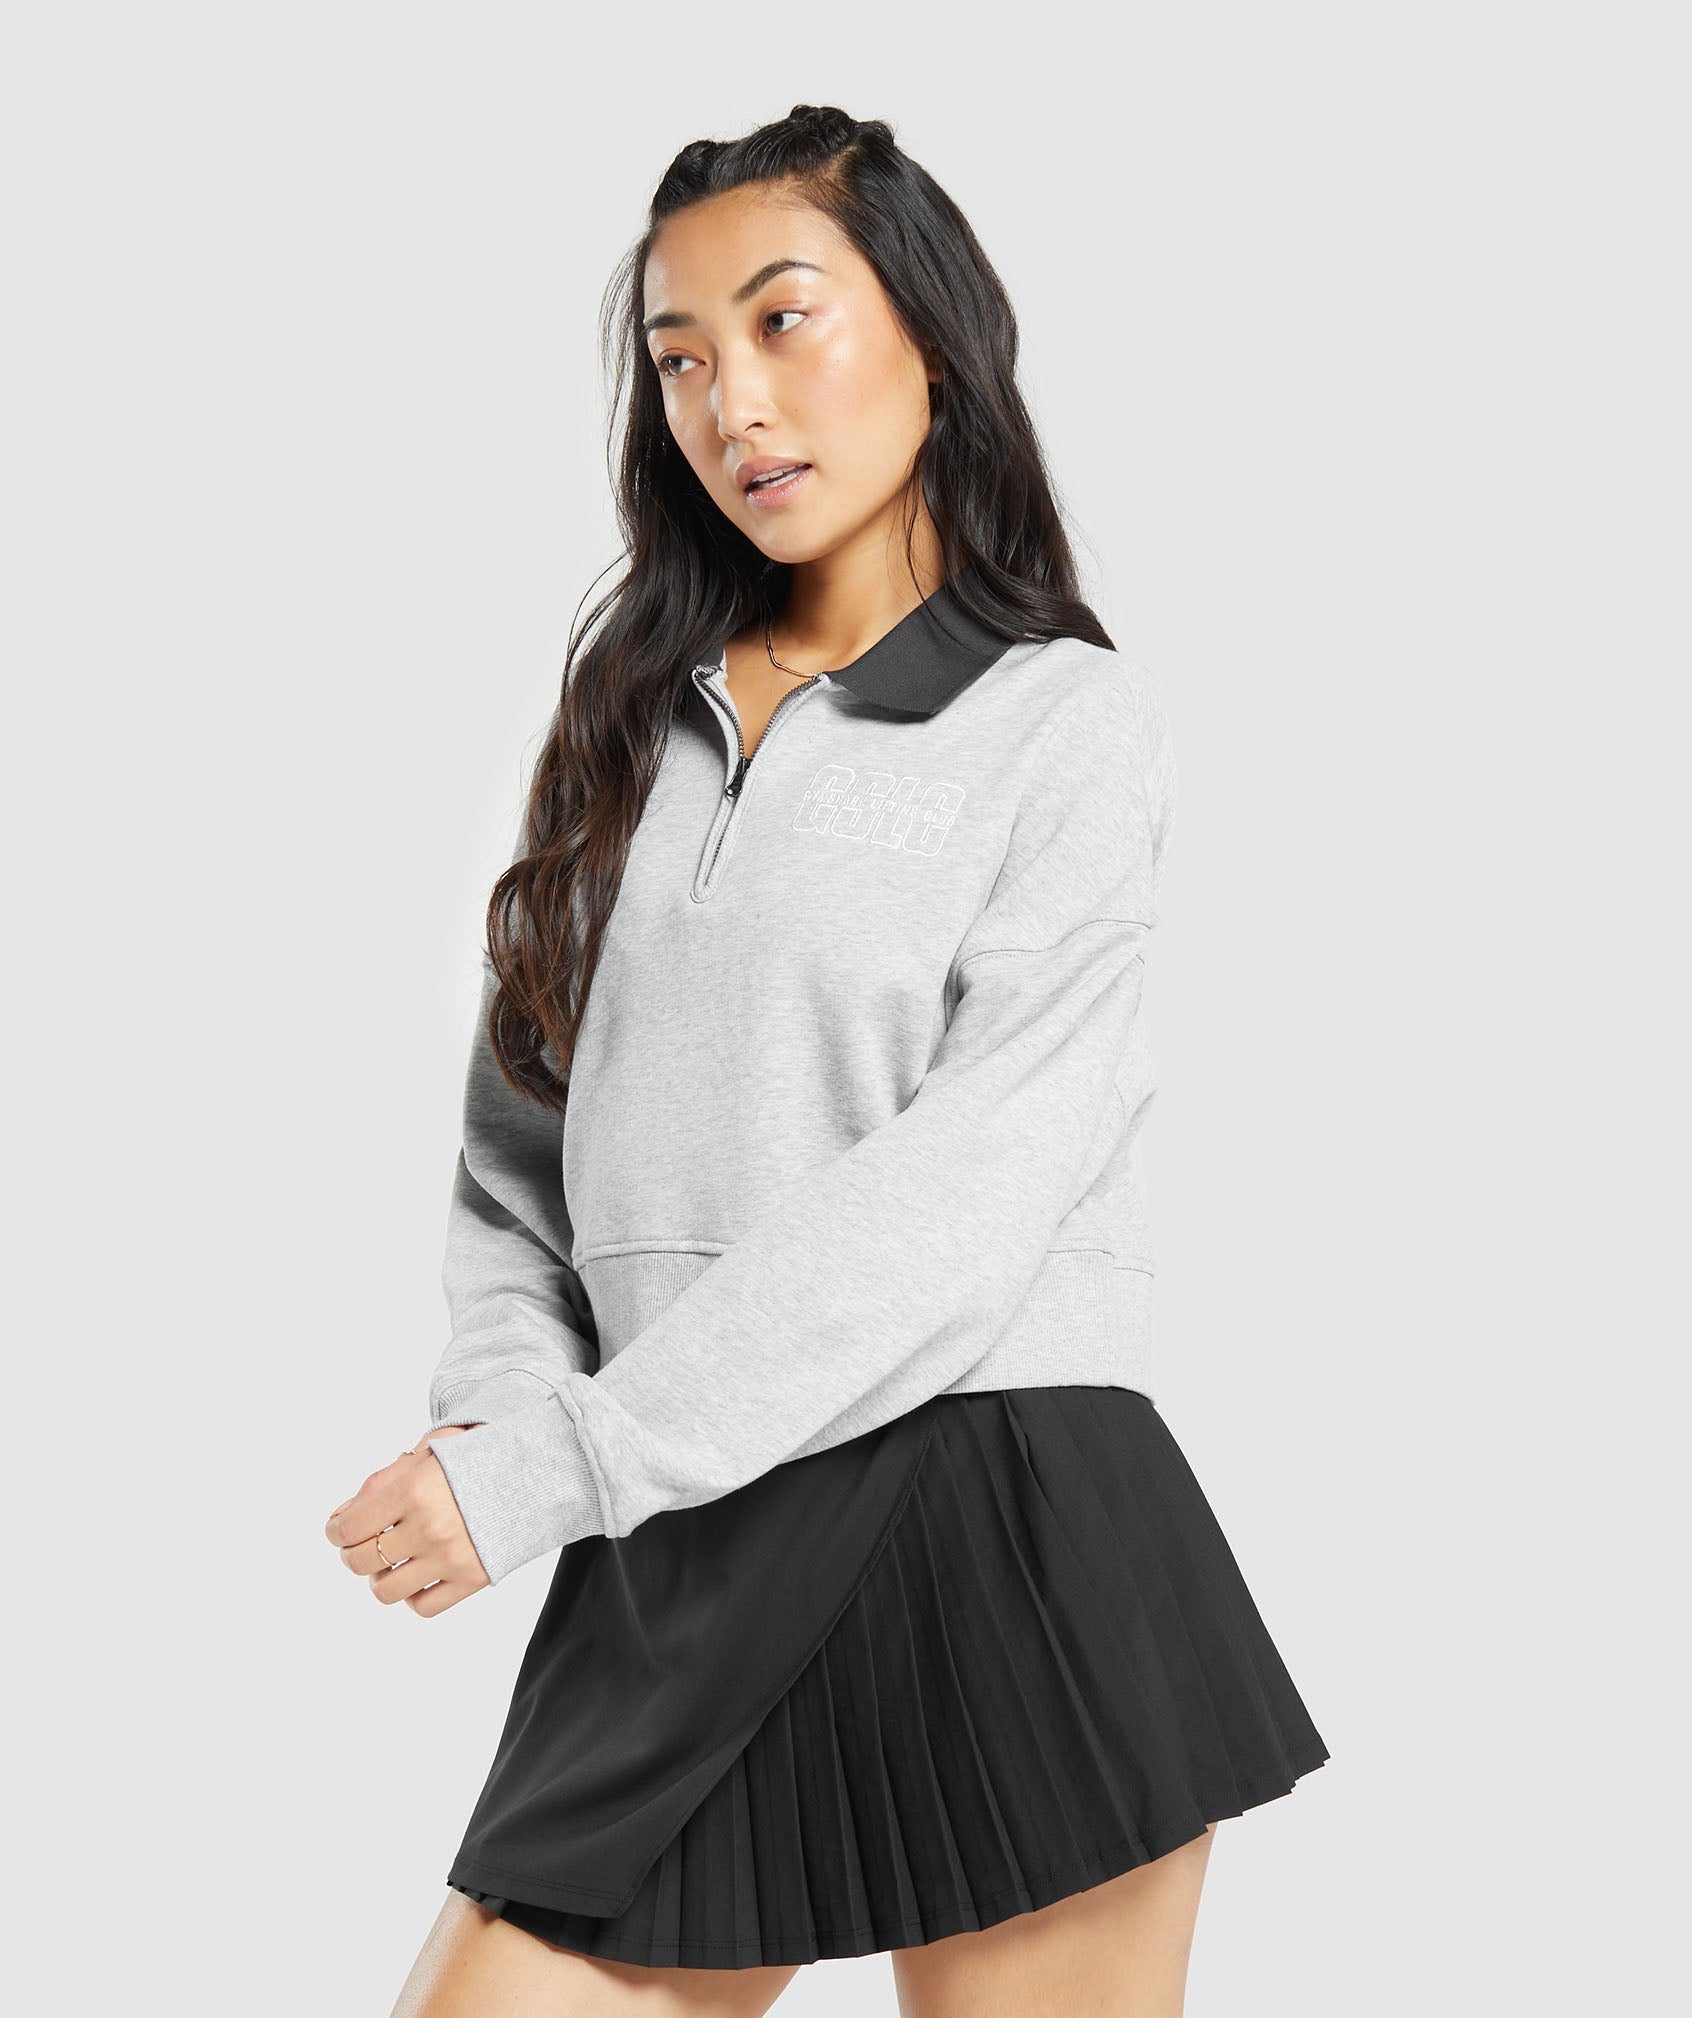 Outline Graphic Oversized 1/4 Zip Pullover in Light Grey Core Marl